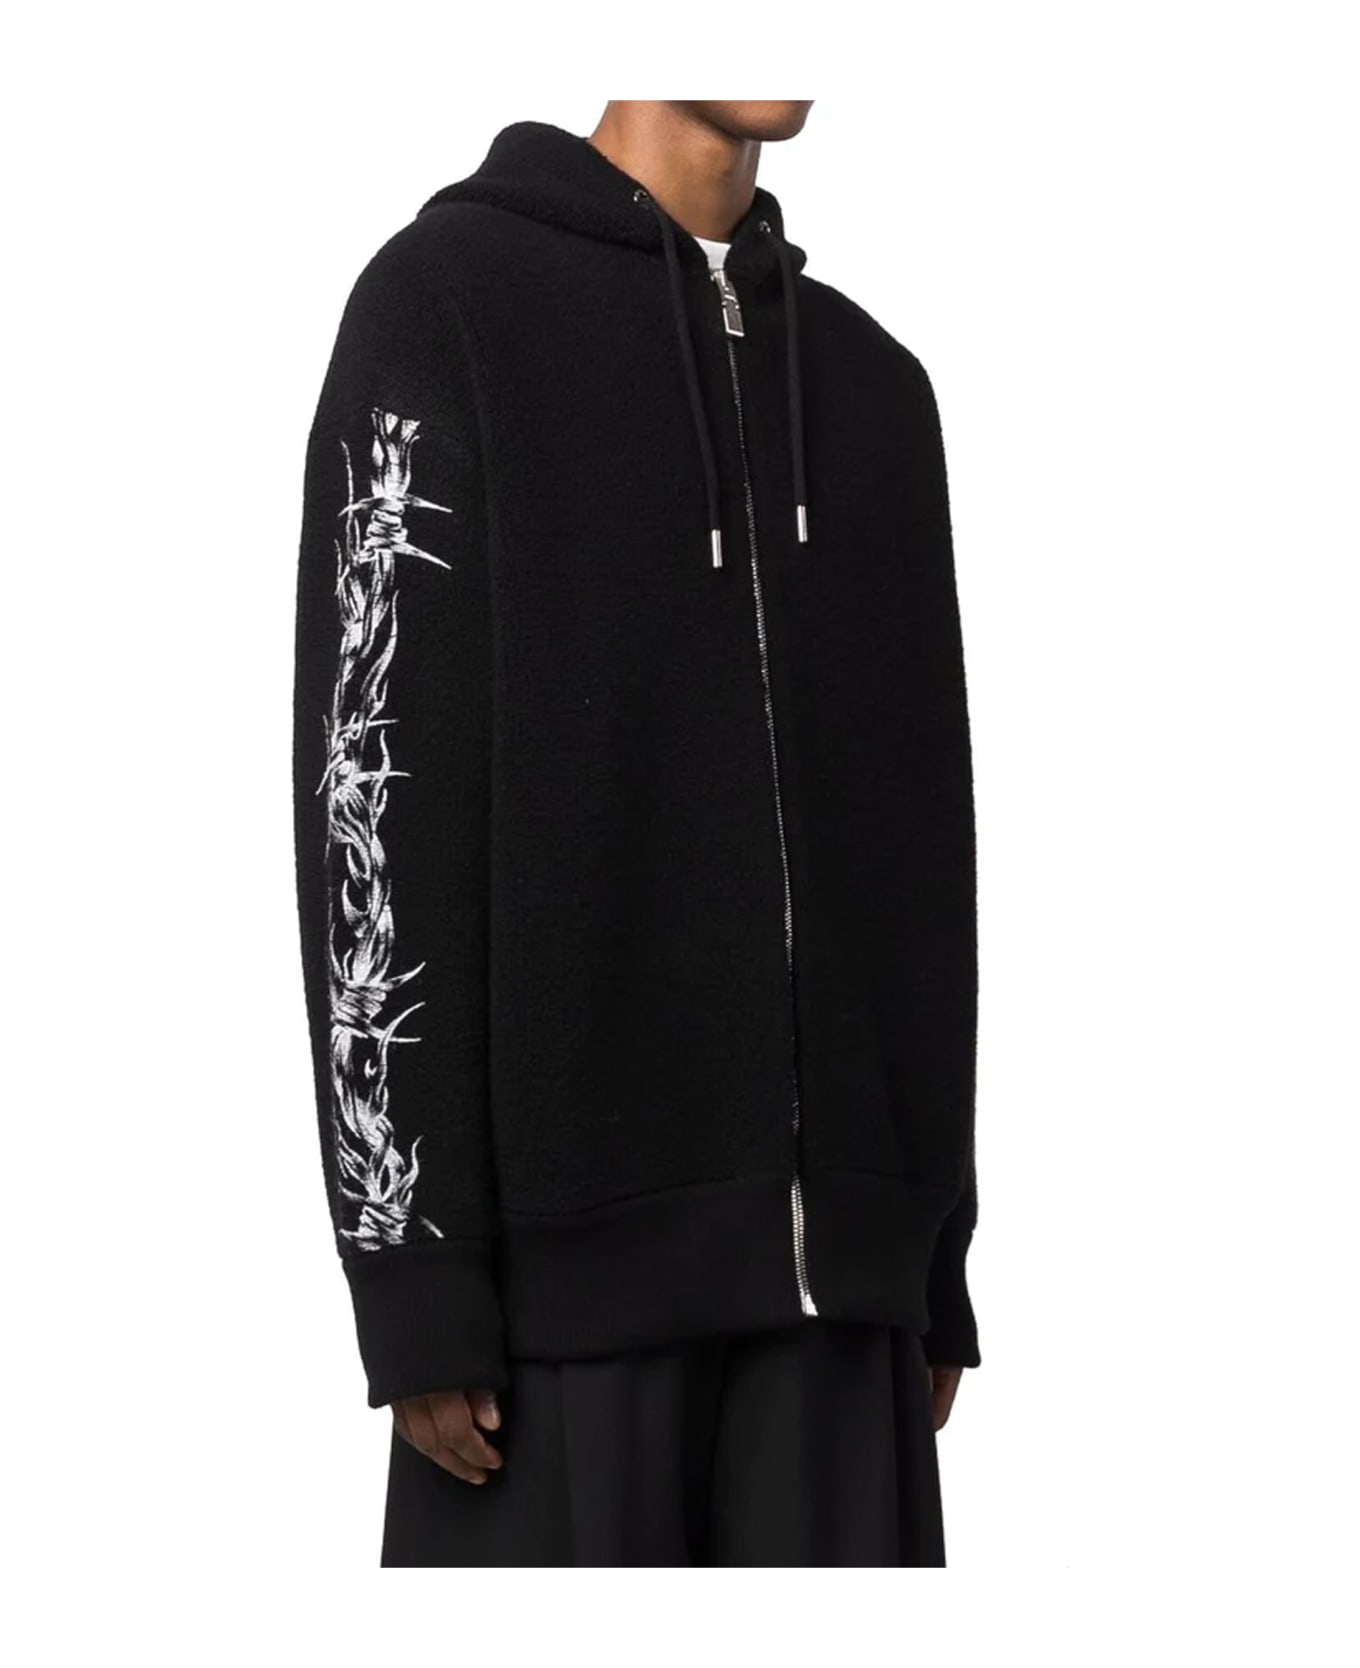 Givenchy Wool Zipped Hoodie - Black